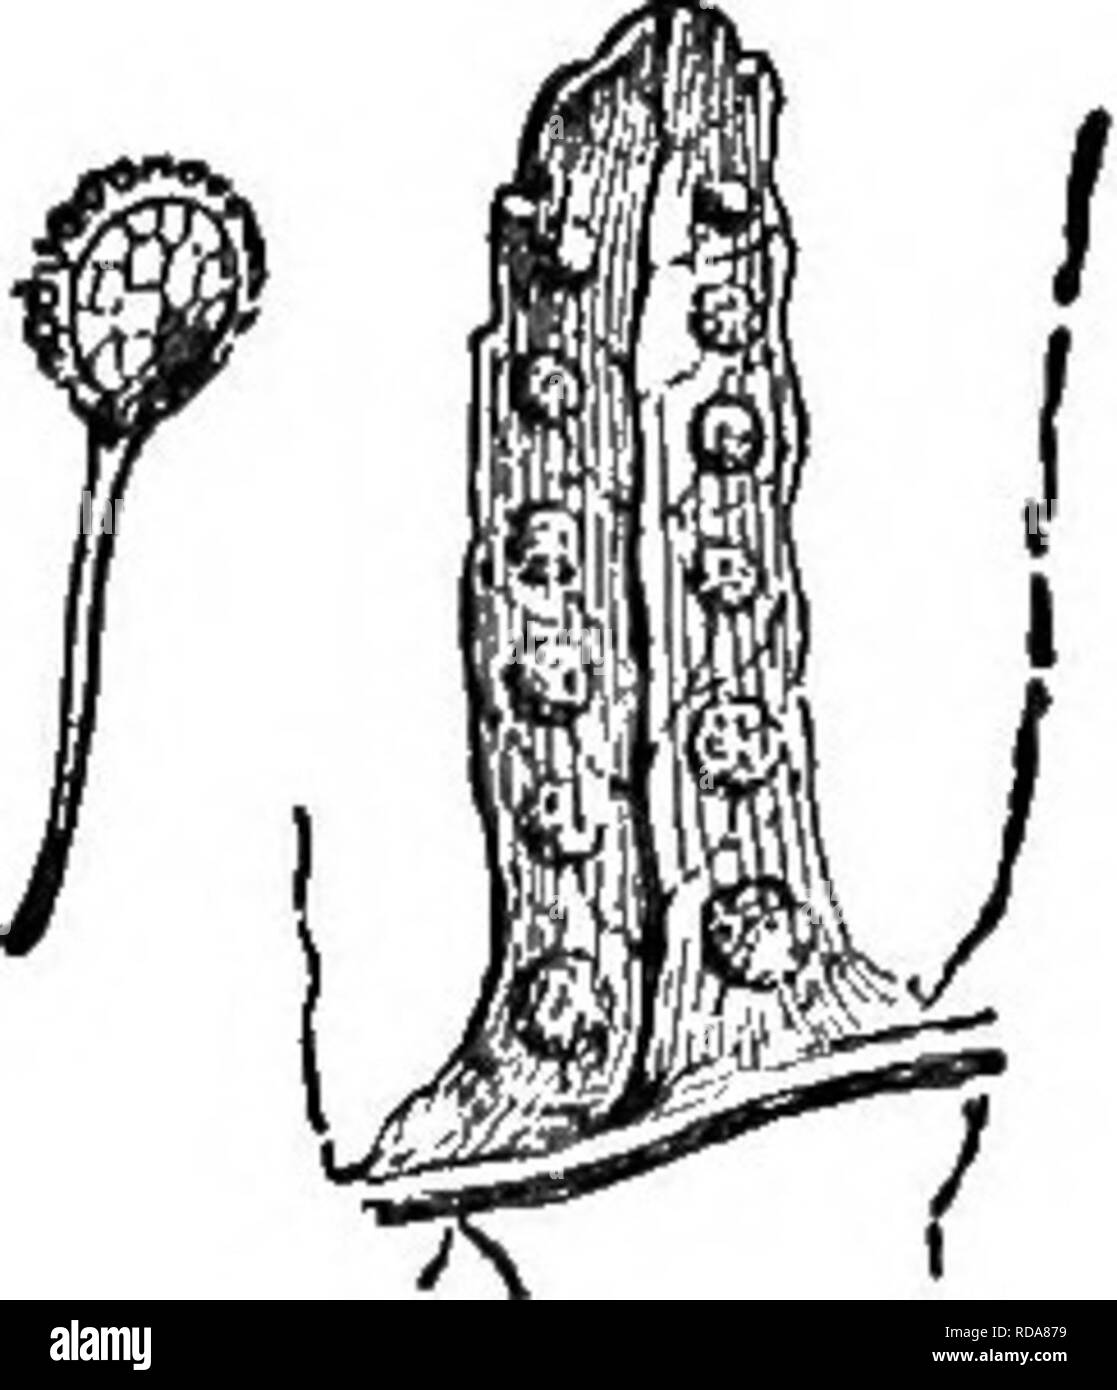 . Beginners' botany. Botany. Fig. 256. — Common Polypode Fern. Polypodium vulgare. Fig. 257. —Sori and Spo- rangium OF Polypode. A chain of cells lies along the top of the sporangium, which springs back elasti- cally on drying, thus dis- seminating the spores. Fig. 258. —The Brake Fruits underneath THE Revolute Edges of the Leaf. The sporangia are collected into little groups, known as sori (singular, sorus) or fruit-dots. Each sorus is covered with a thin scale or shield, known as an indusium. This indusium sepa- rates from the frond at its edges, and the sporangia are exposed. Not all ferns  Stock Photo